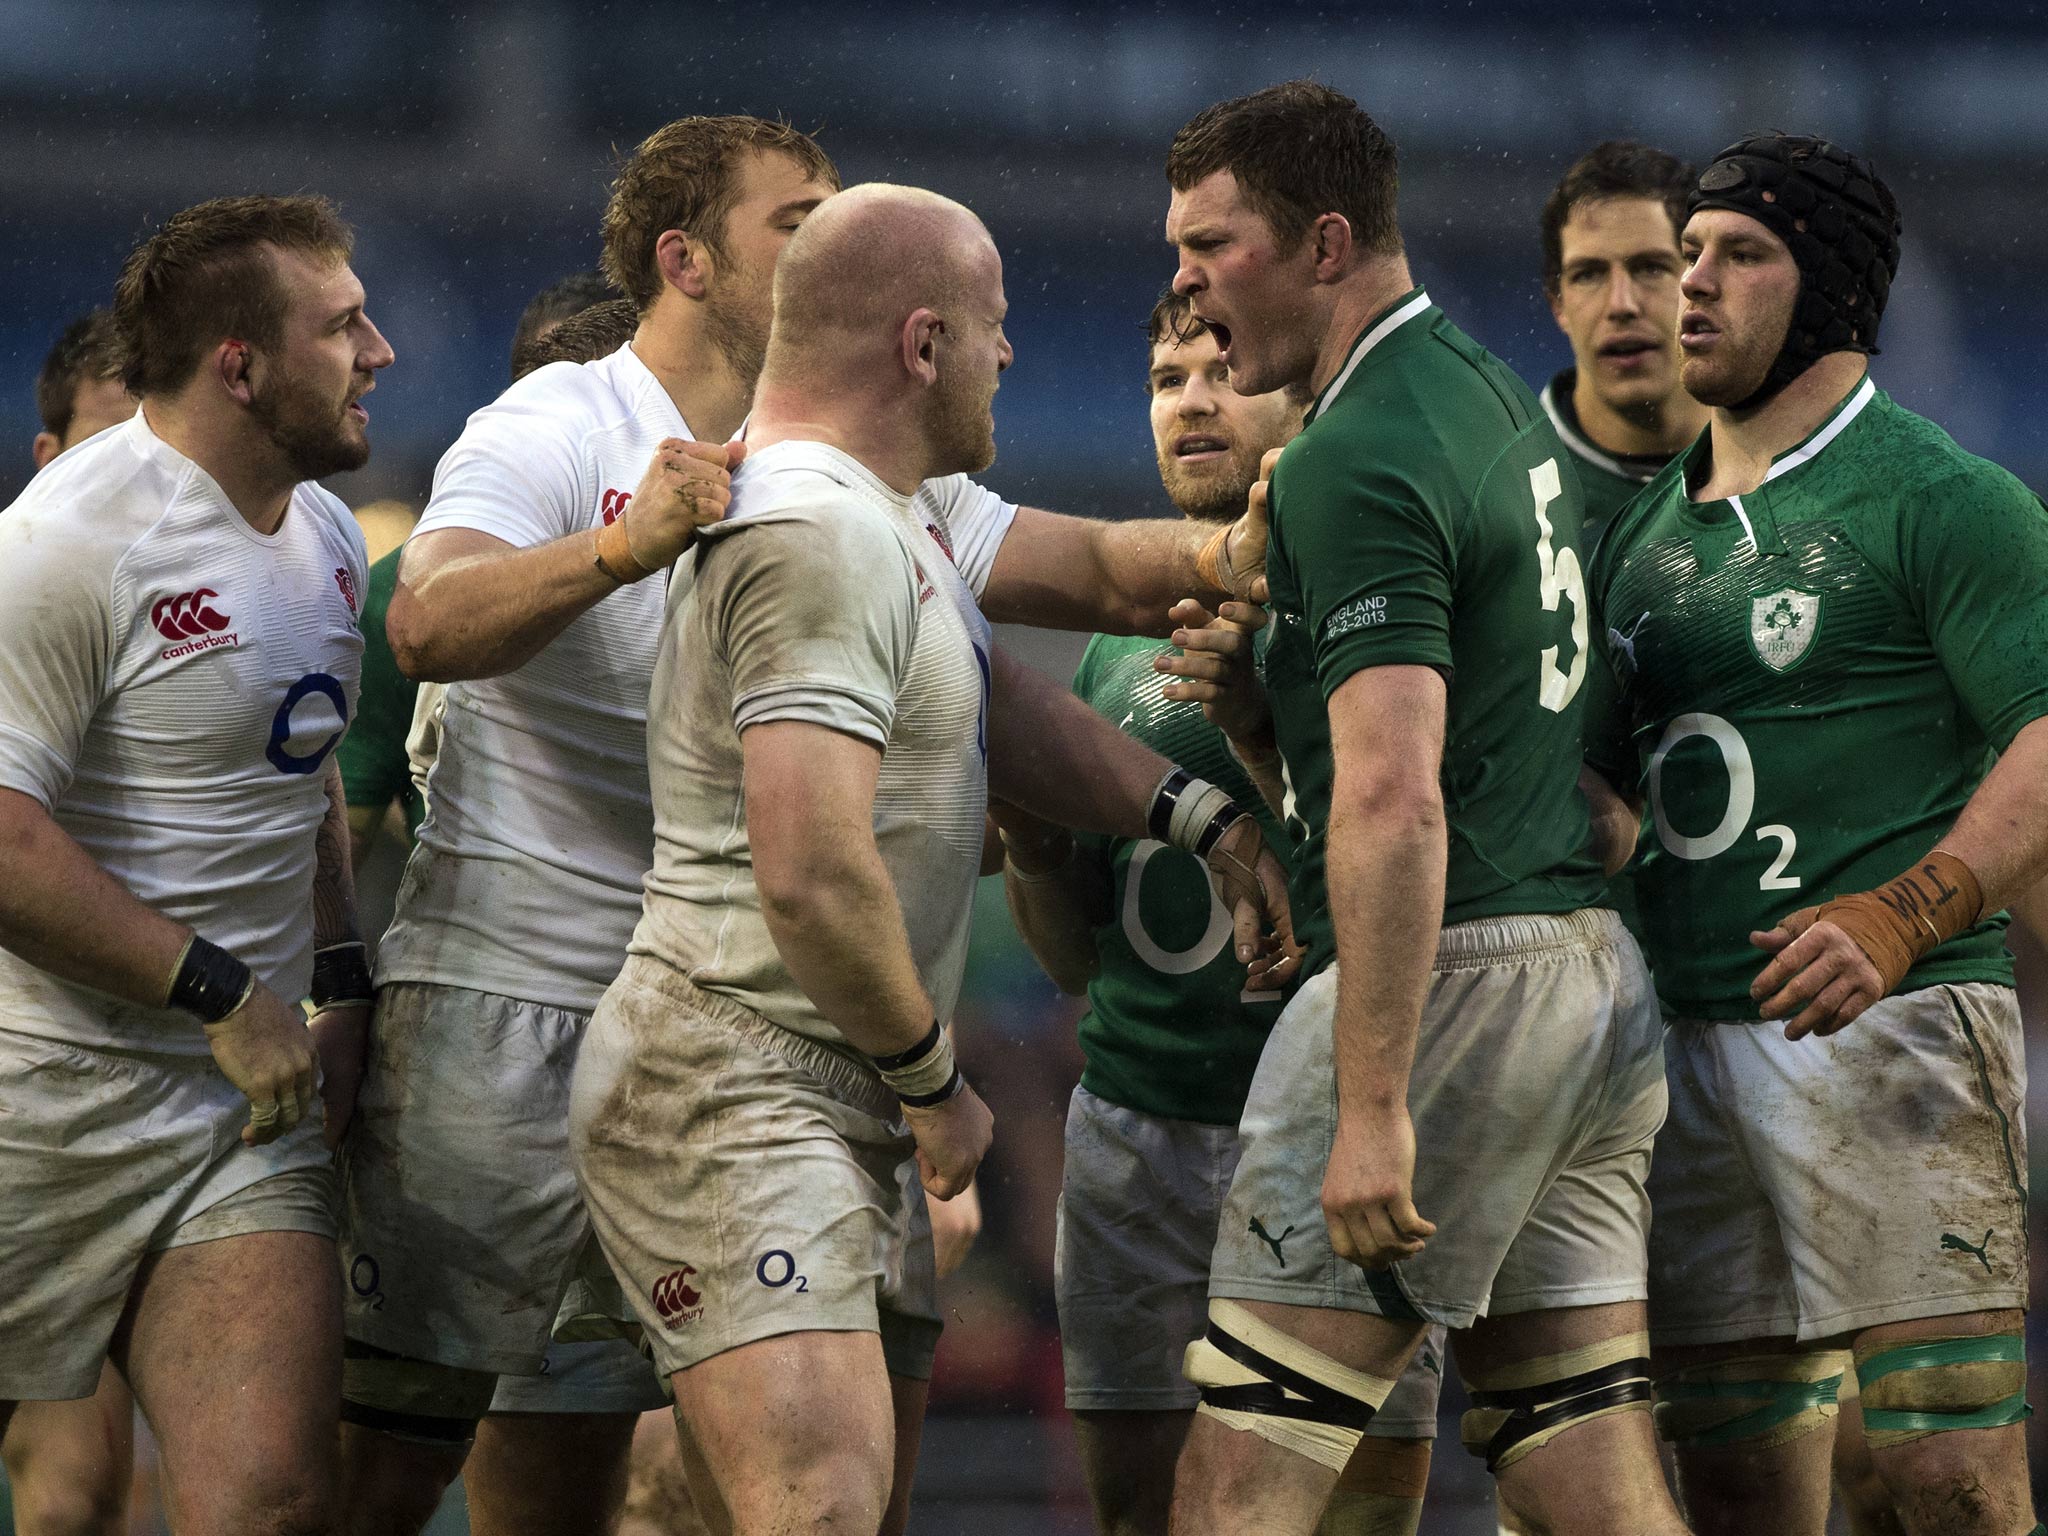 England's prop Dan Cole goes head to head with Ireland's lock Donnacha Ryan (2nd R) after the incident involving Cian Healy